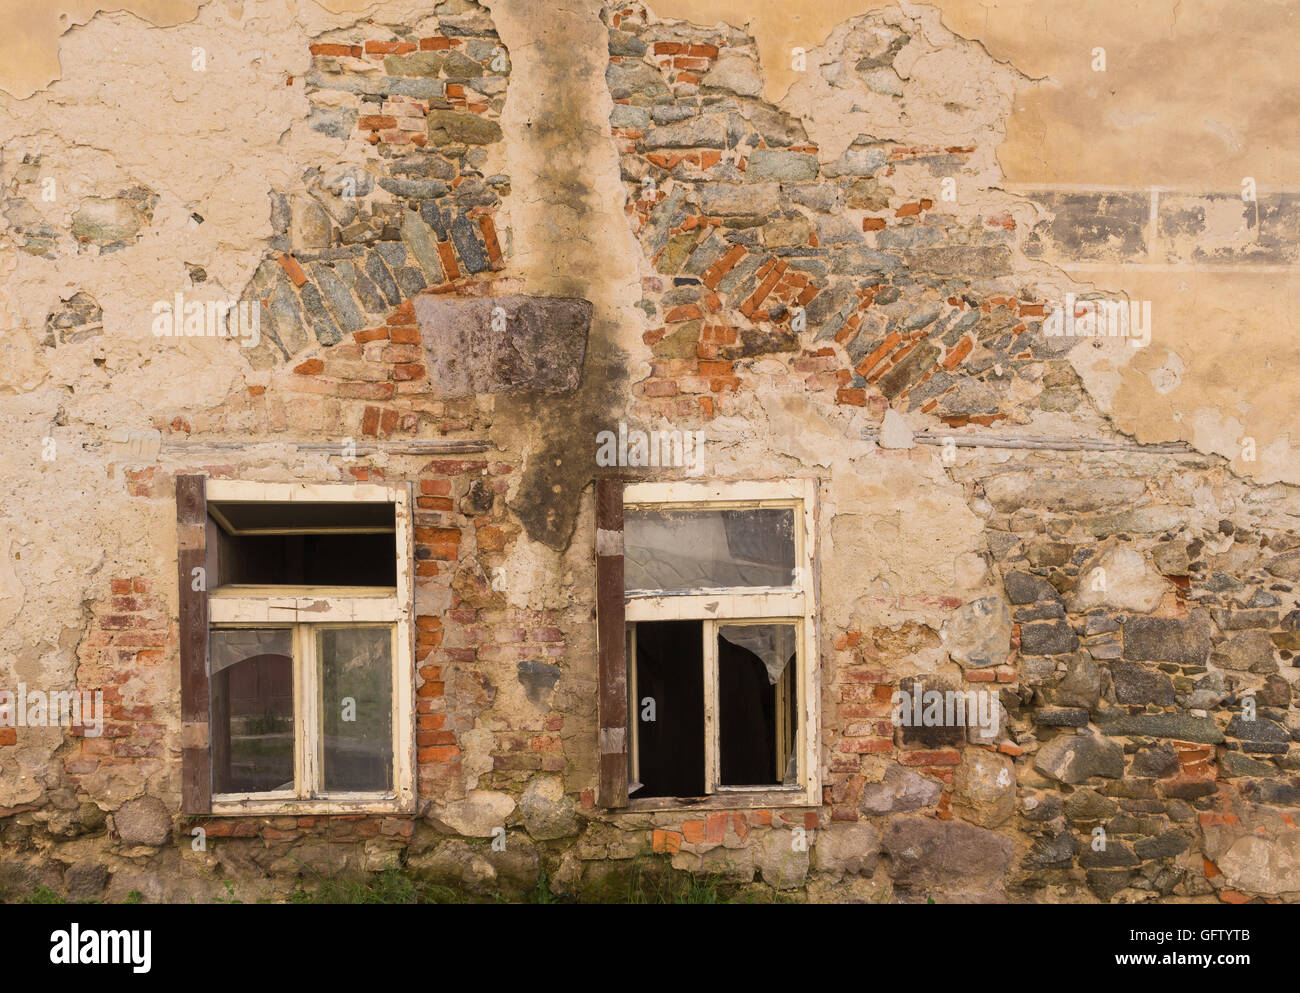 Couple of windows of an abandoned house. Broken glass. Wall of the building  with many details of the colorful bricks and stones Stock Photo - Alamy